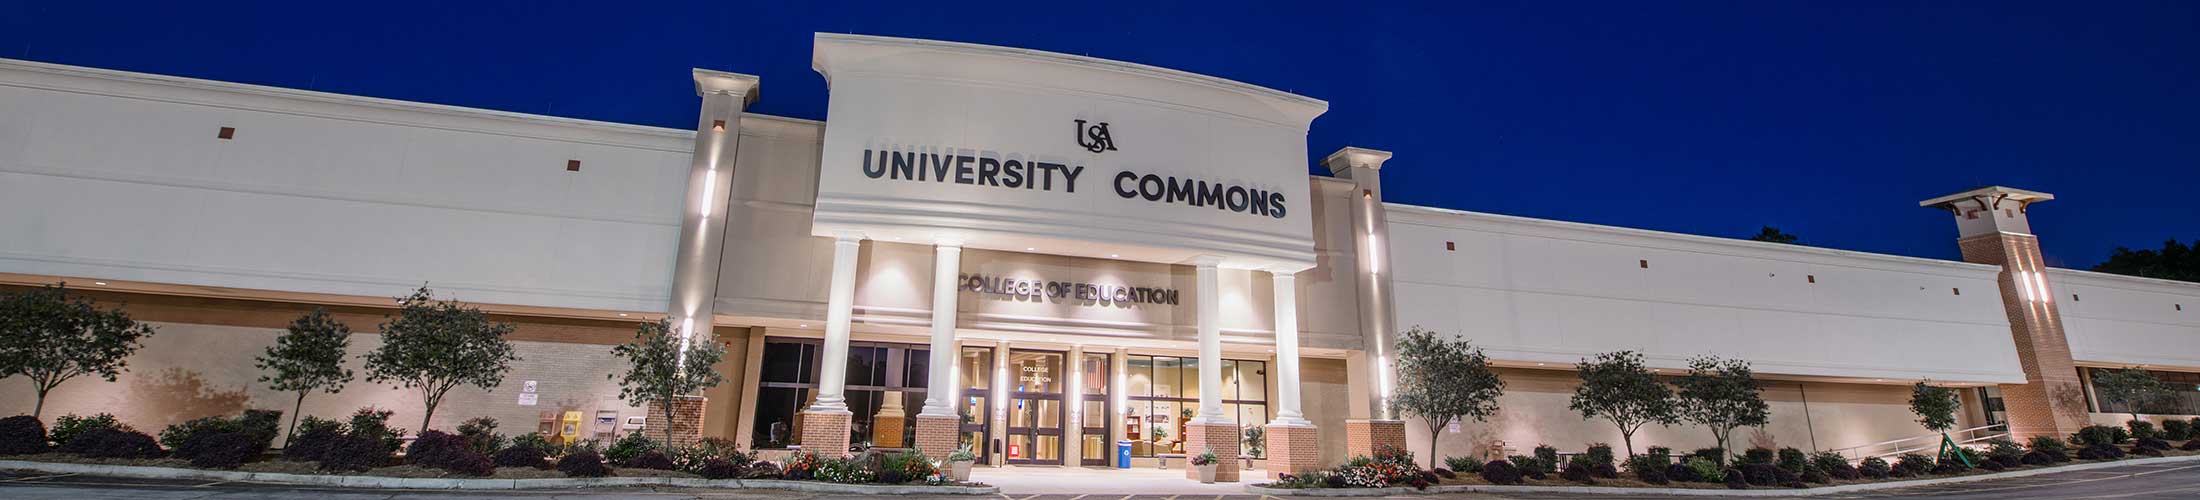 USA College of Education at Night.